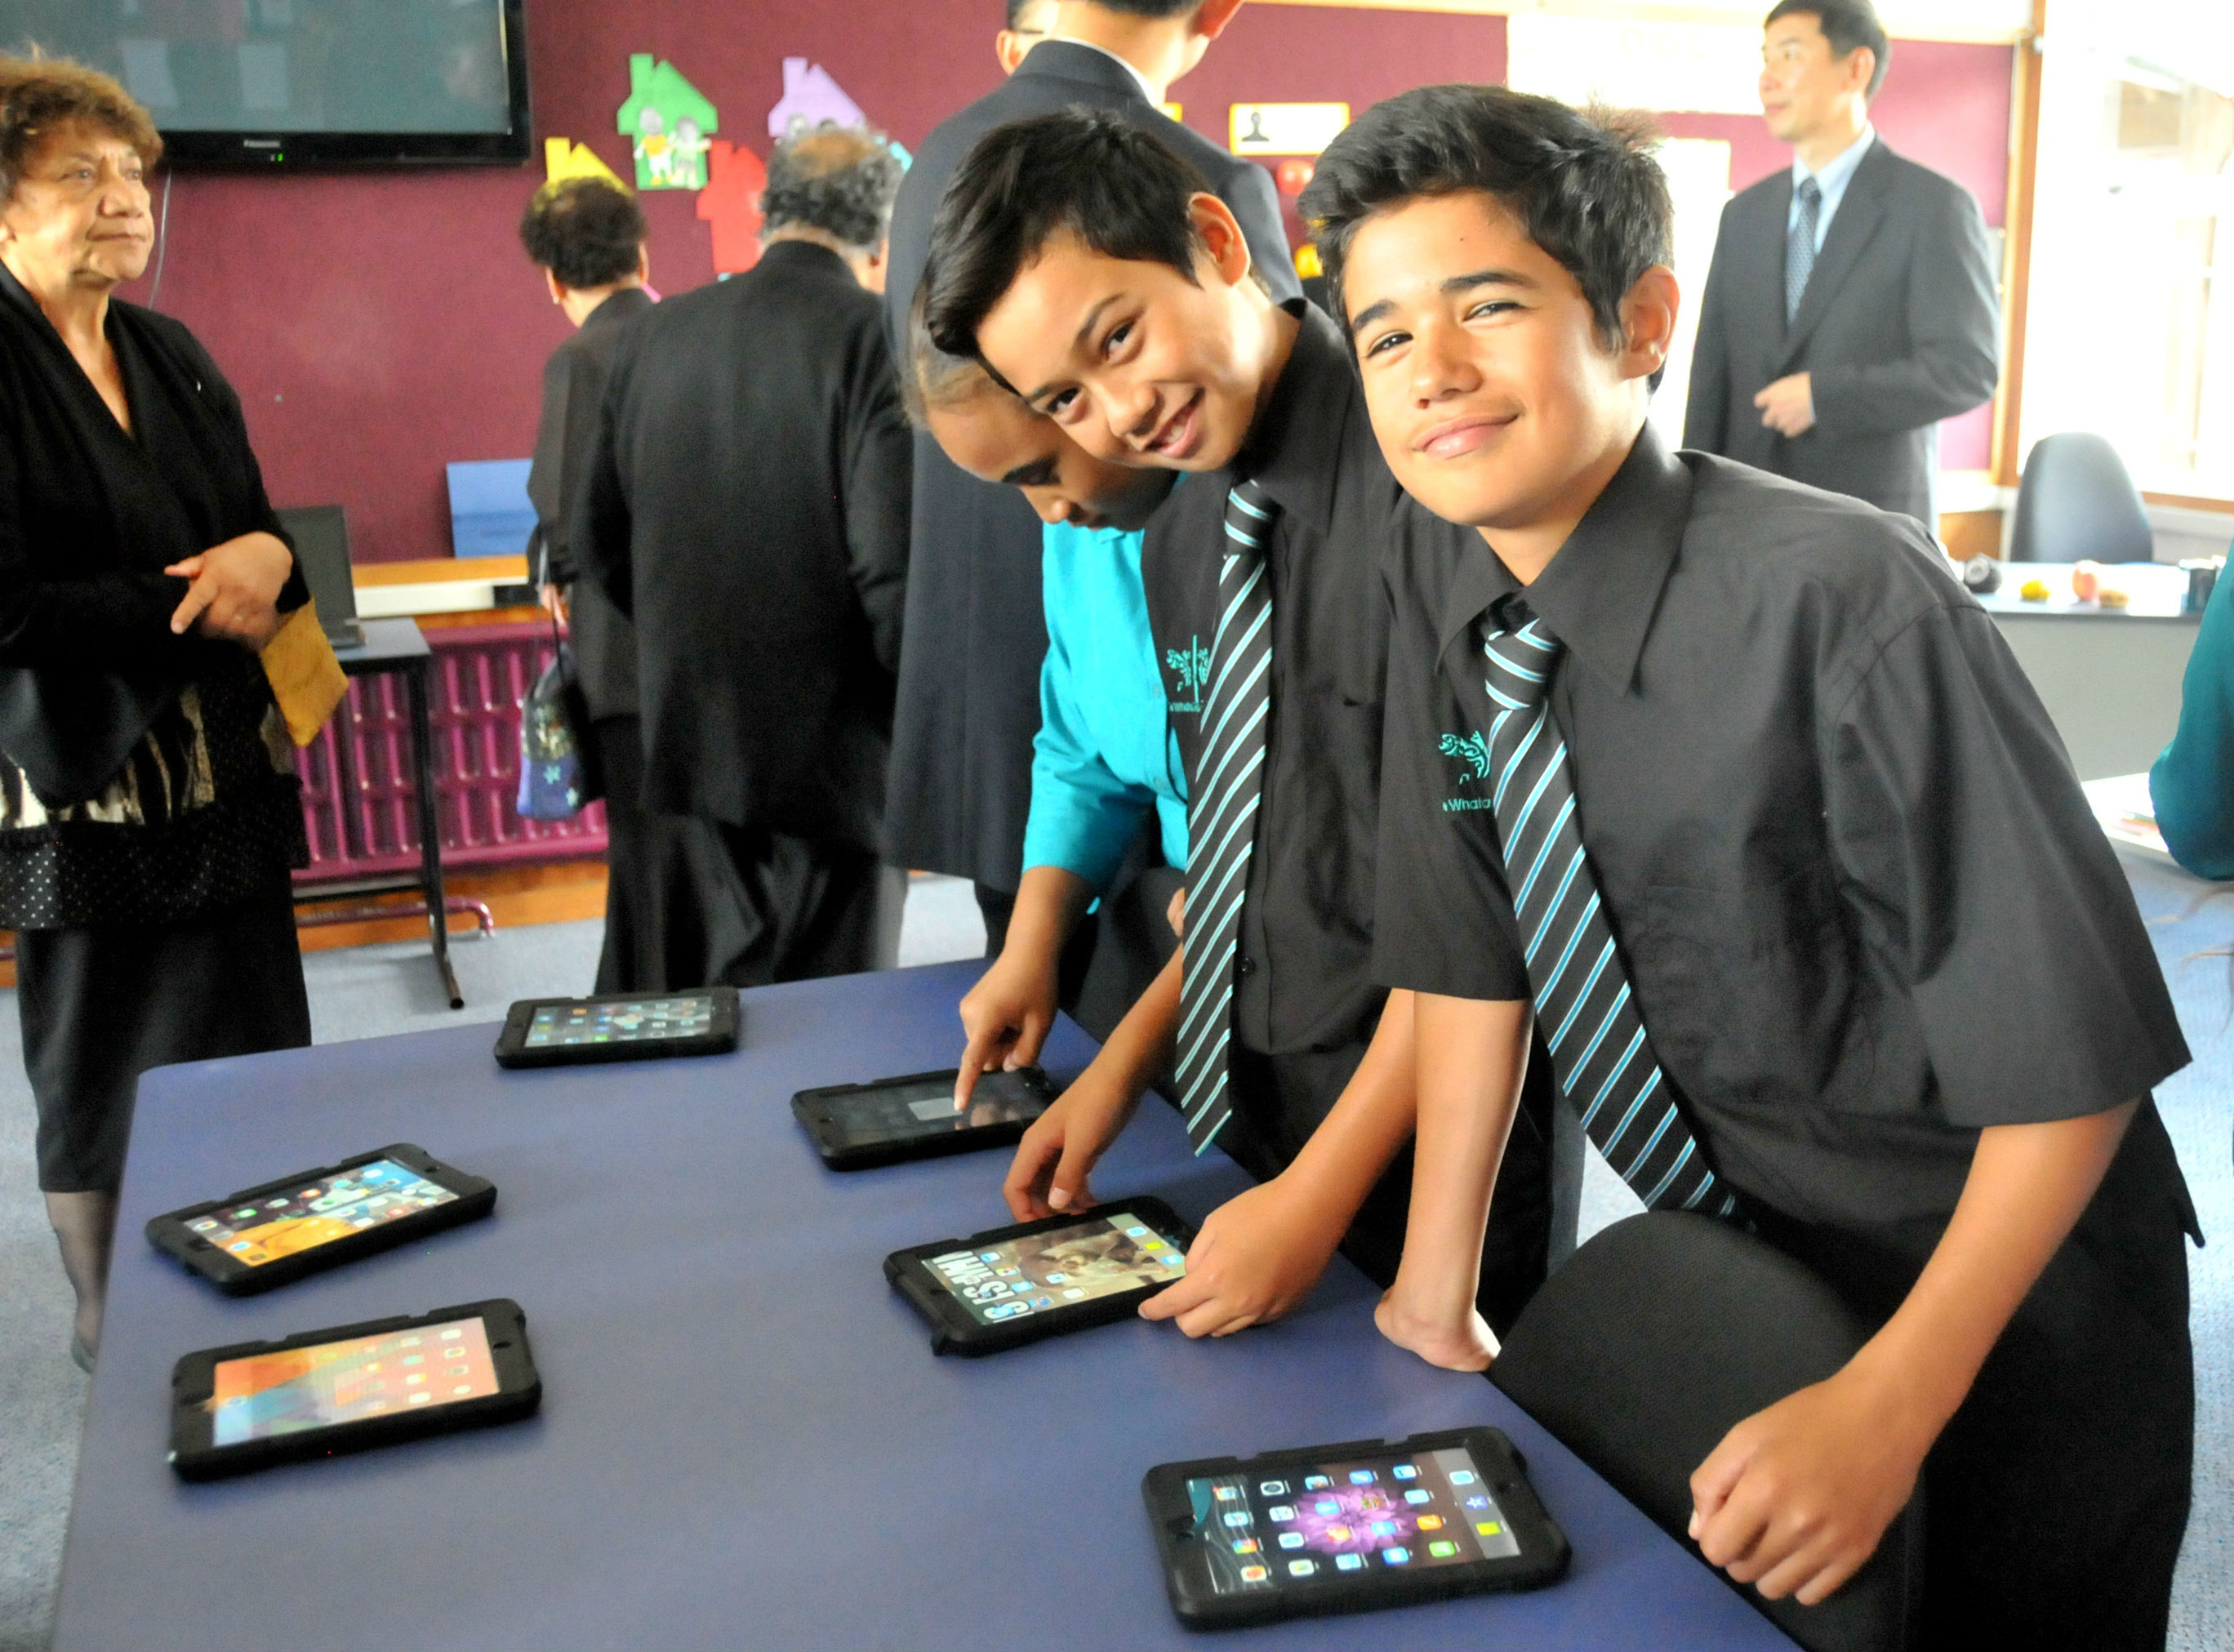 Students learn Chinese through multimedia devices.